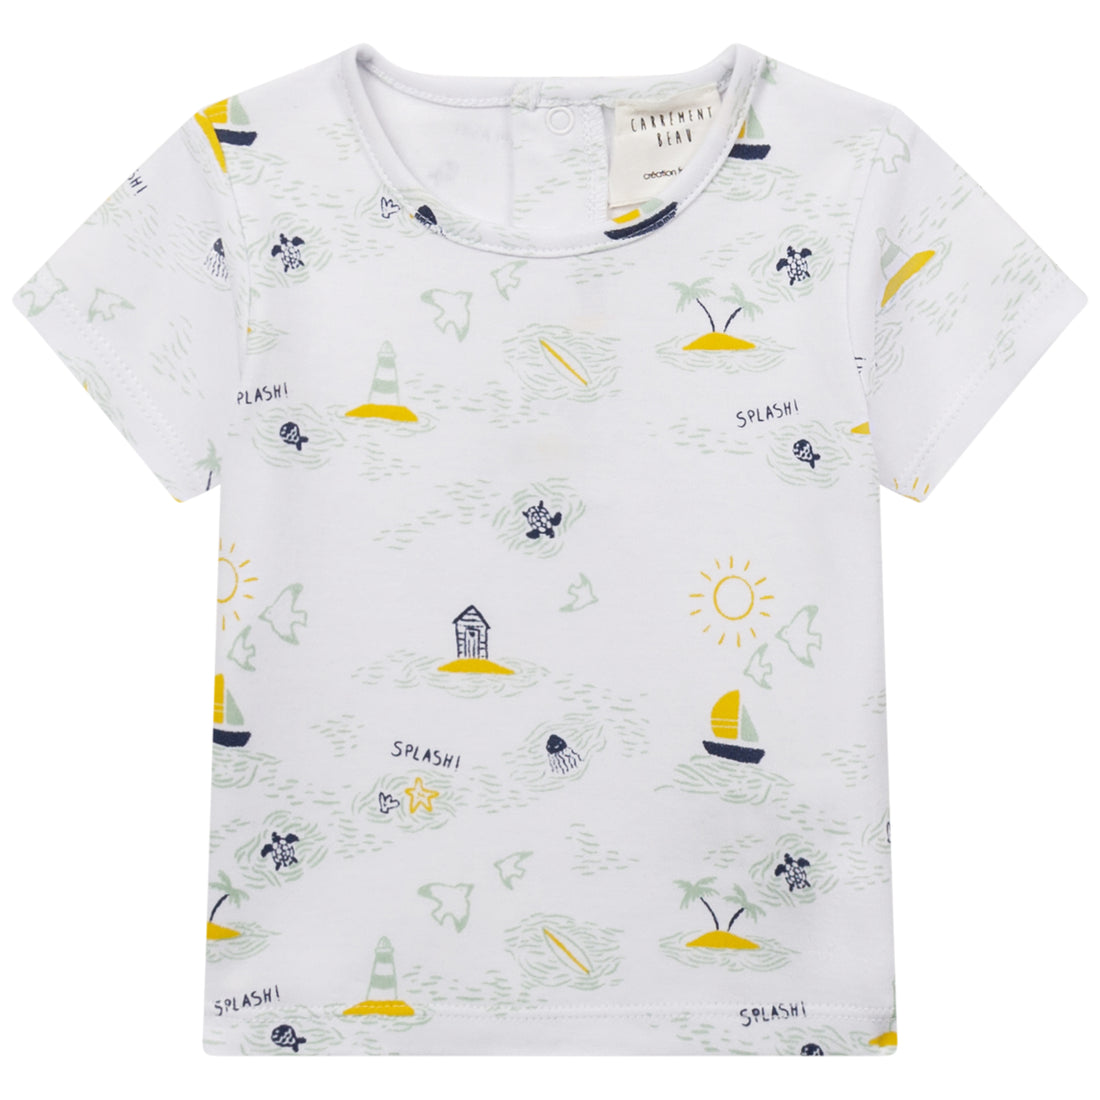 carrément-beau-short-sleeves-tee-shirt-summer-infant-white-carr-s22-y05158-10b-6y- (1)